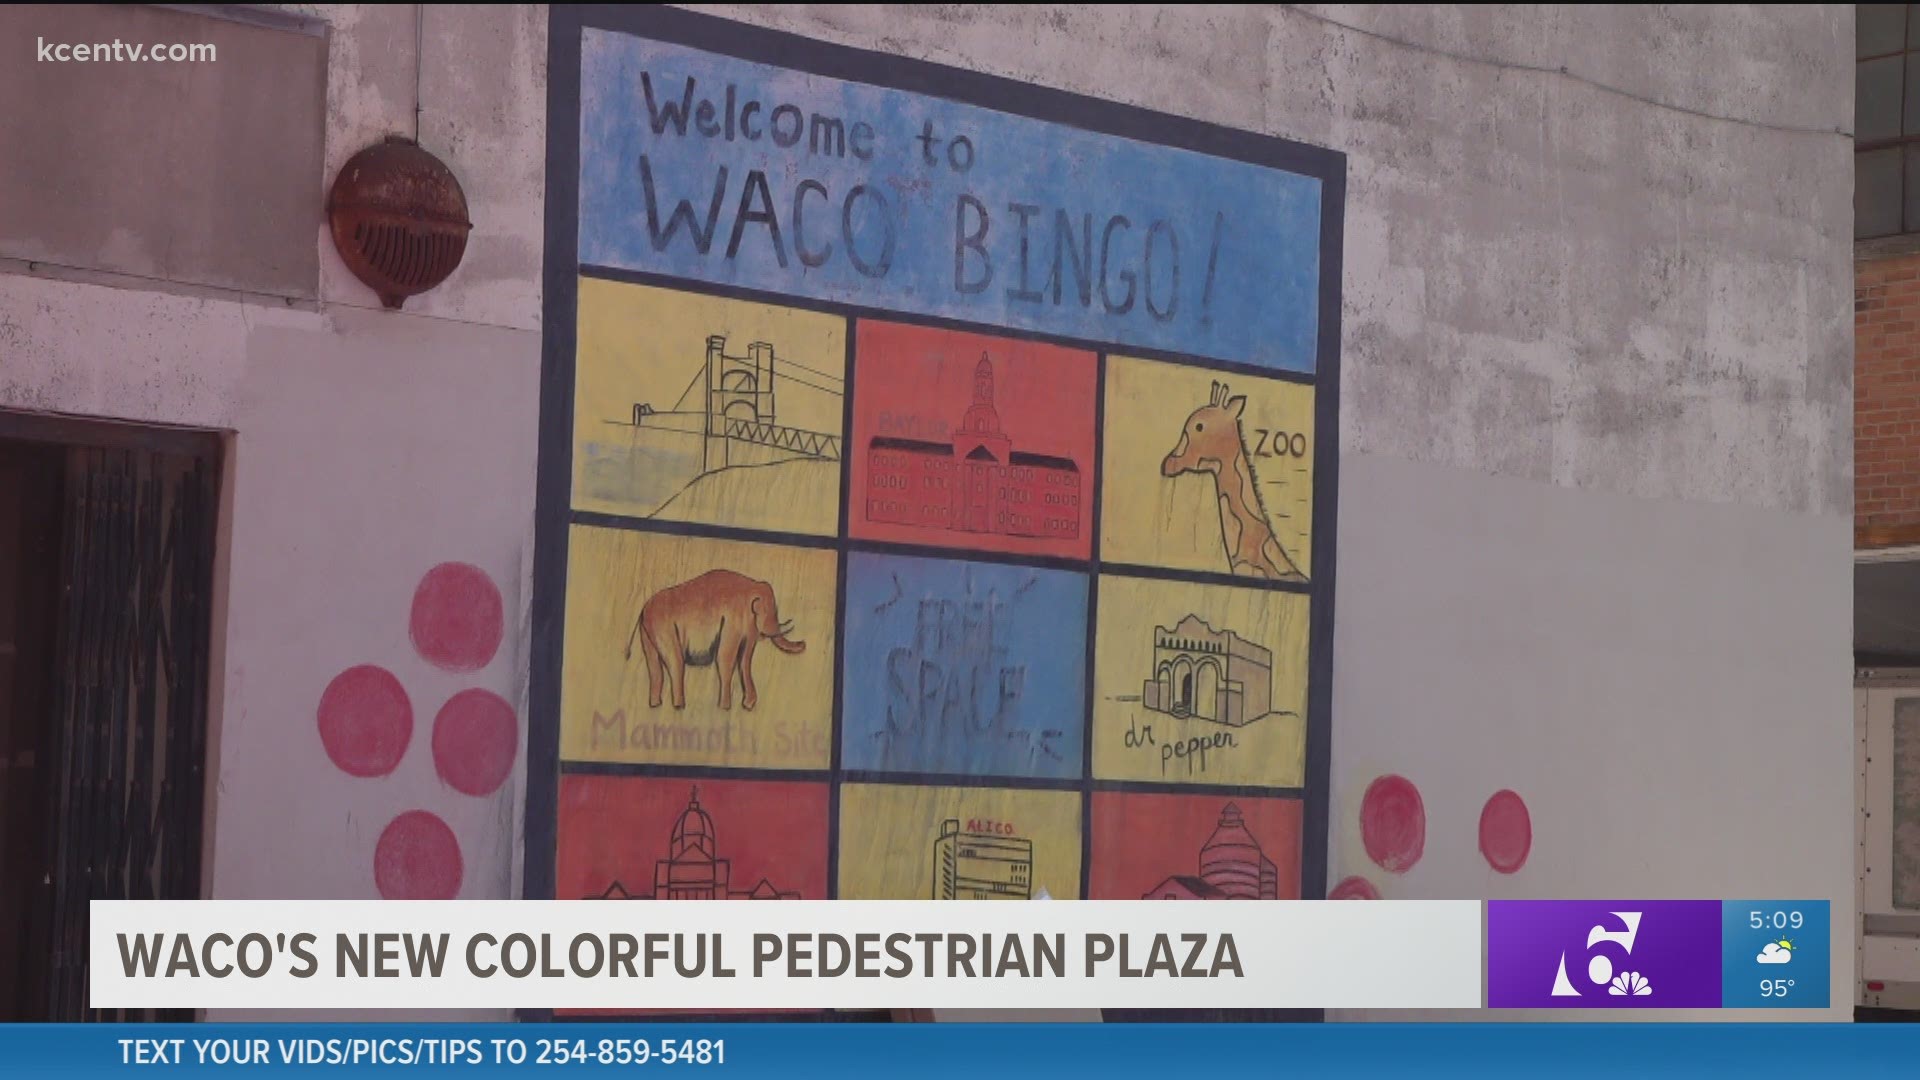 It's all part of Summer of Downtown Project in Waco